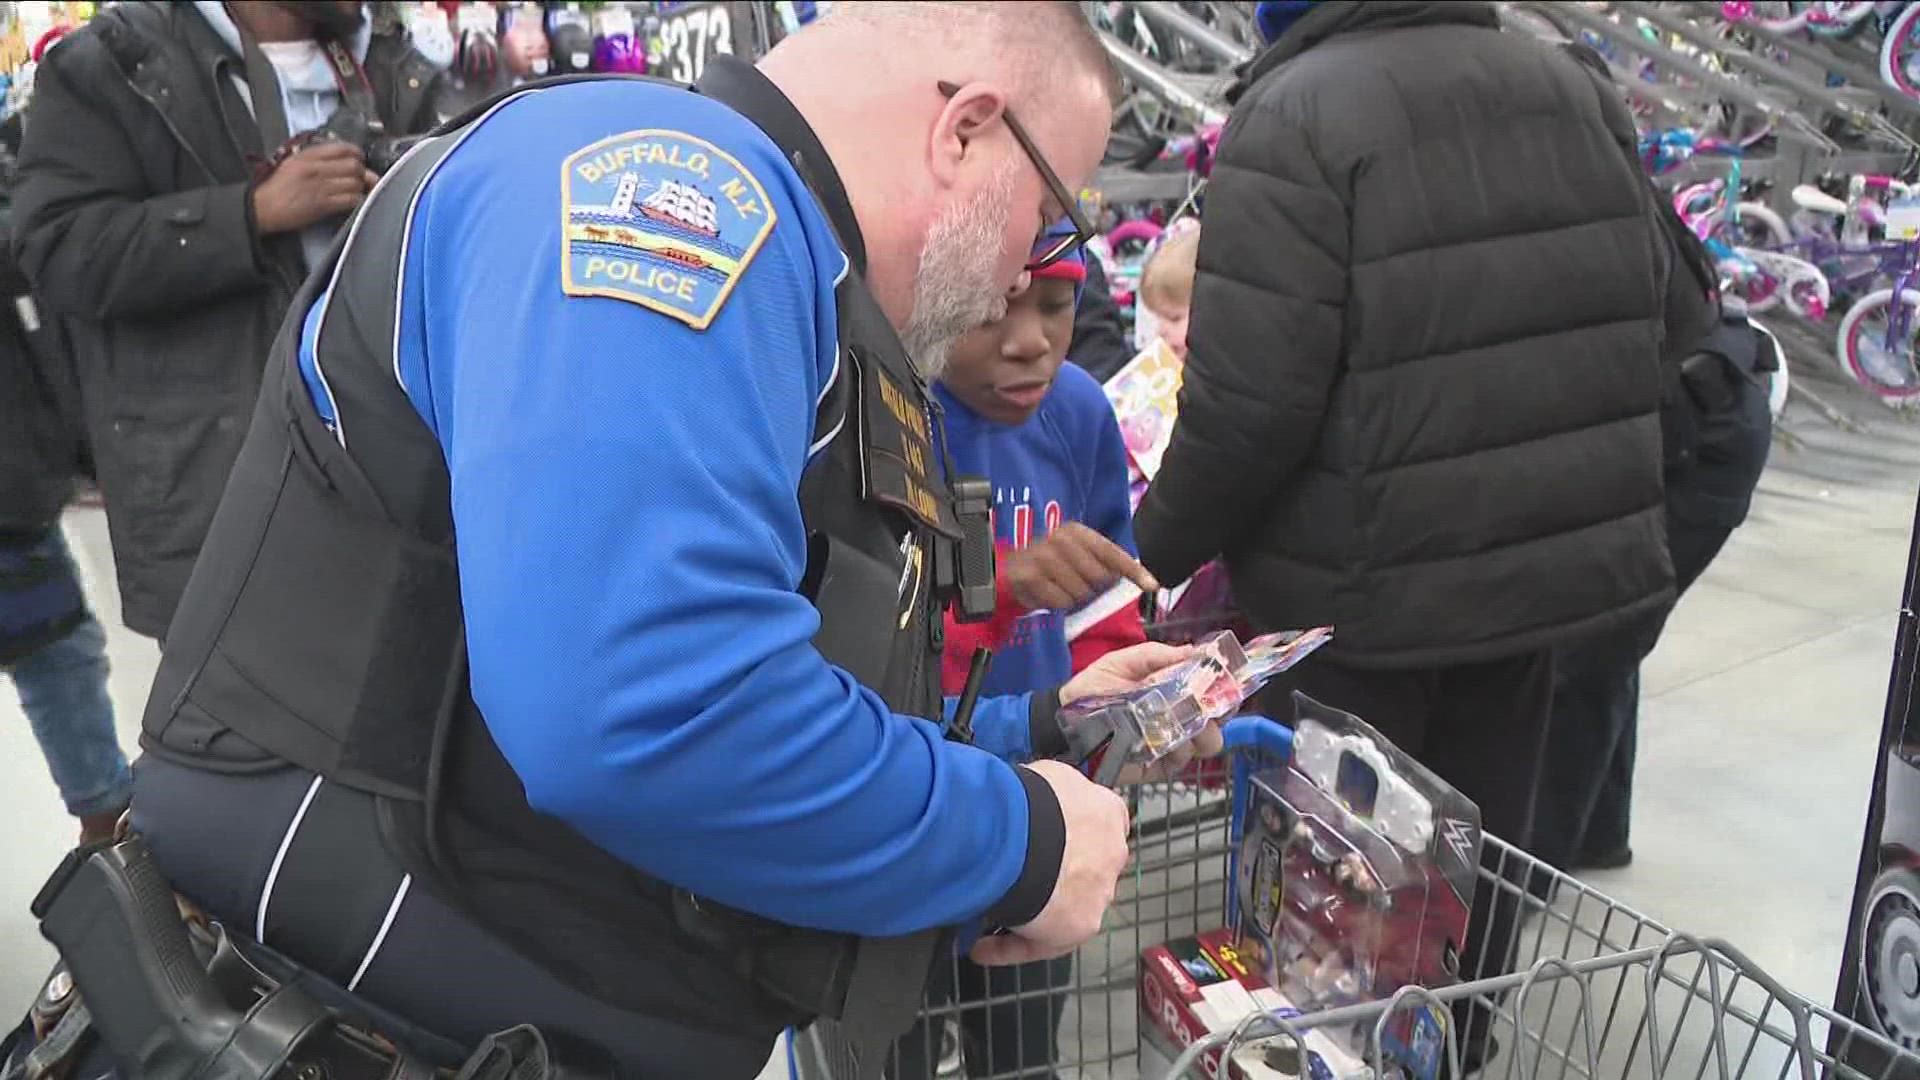 Spreading cheer this holiday season, Buffalo Police officers took children on a shopping trip to help them buy gifts for themselves and their families.